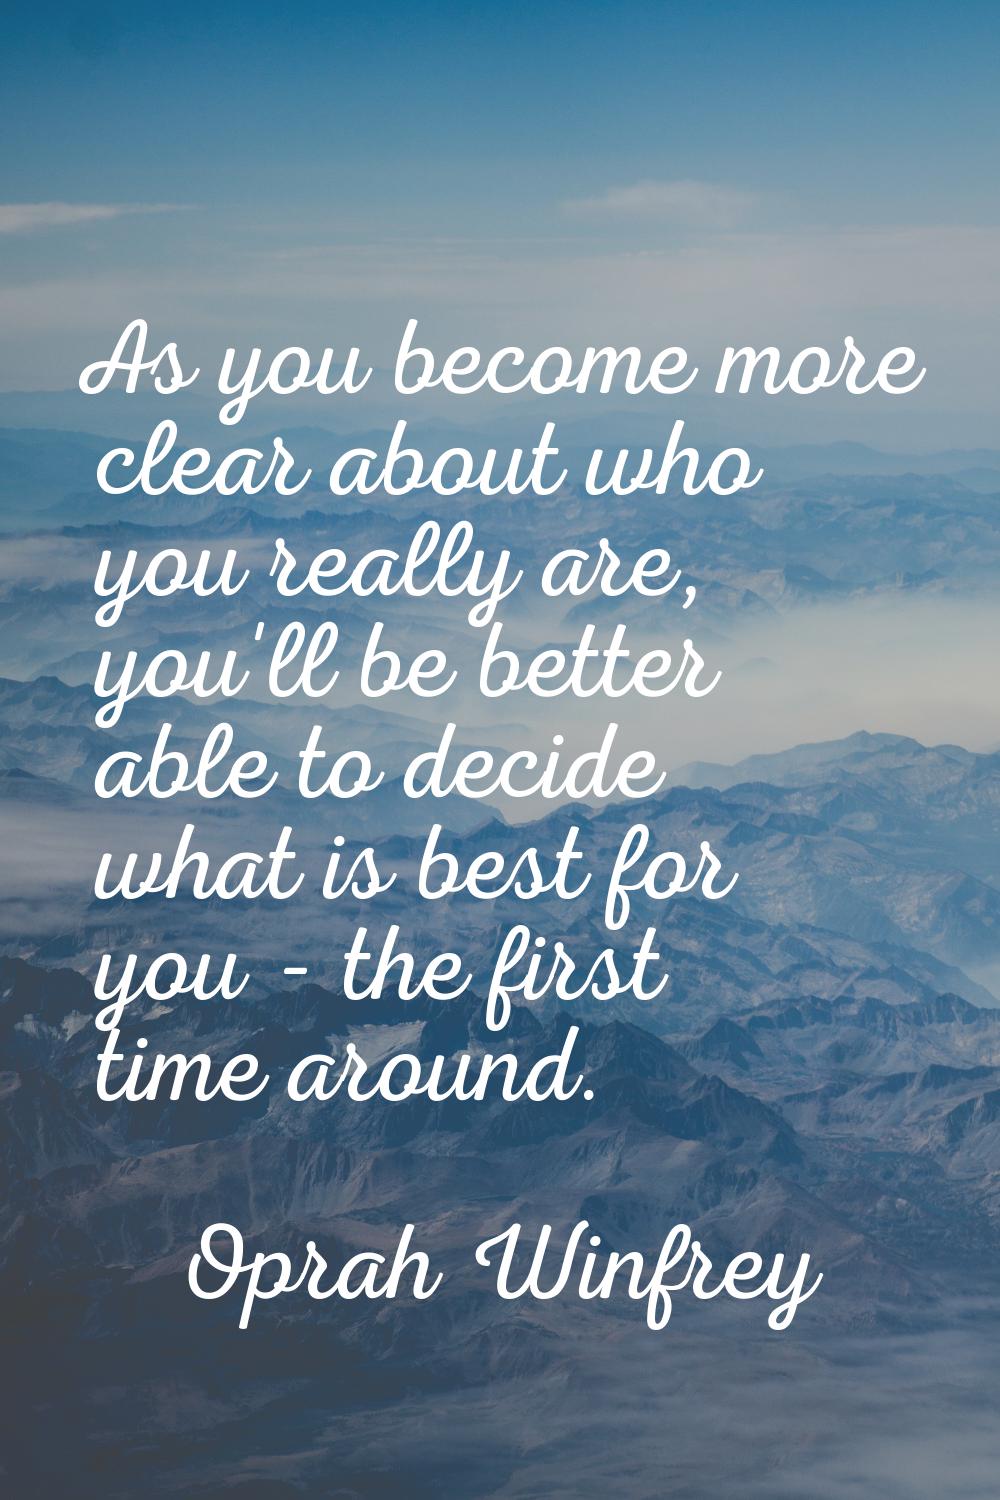 As you become more clear about who you really are, you'll be better able to decide what is best for